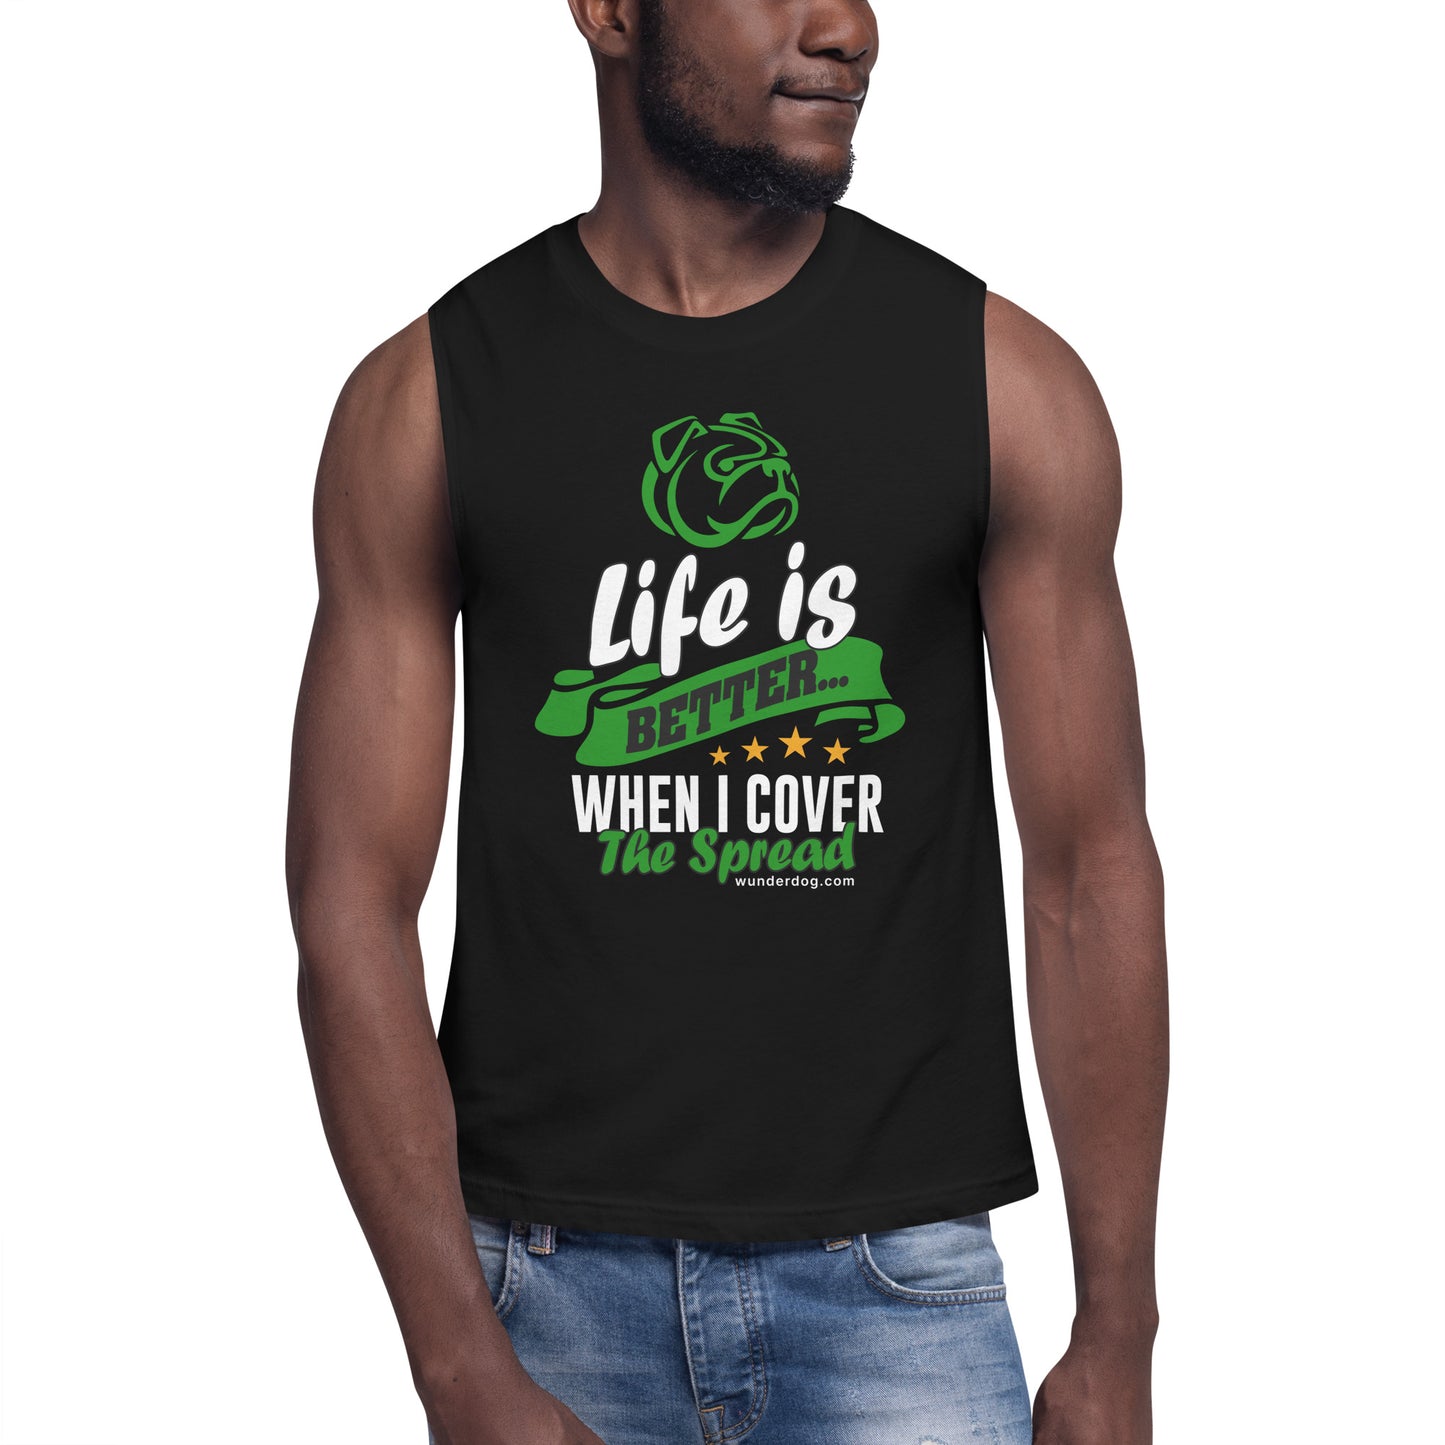 Life is Better Unisex Muscle Shirt